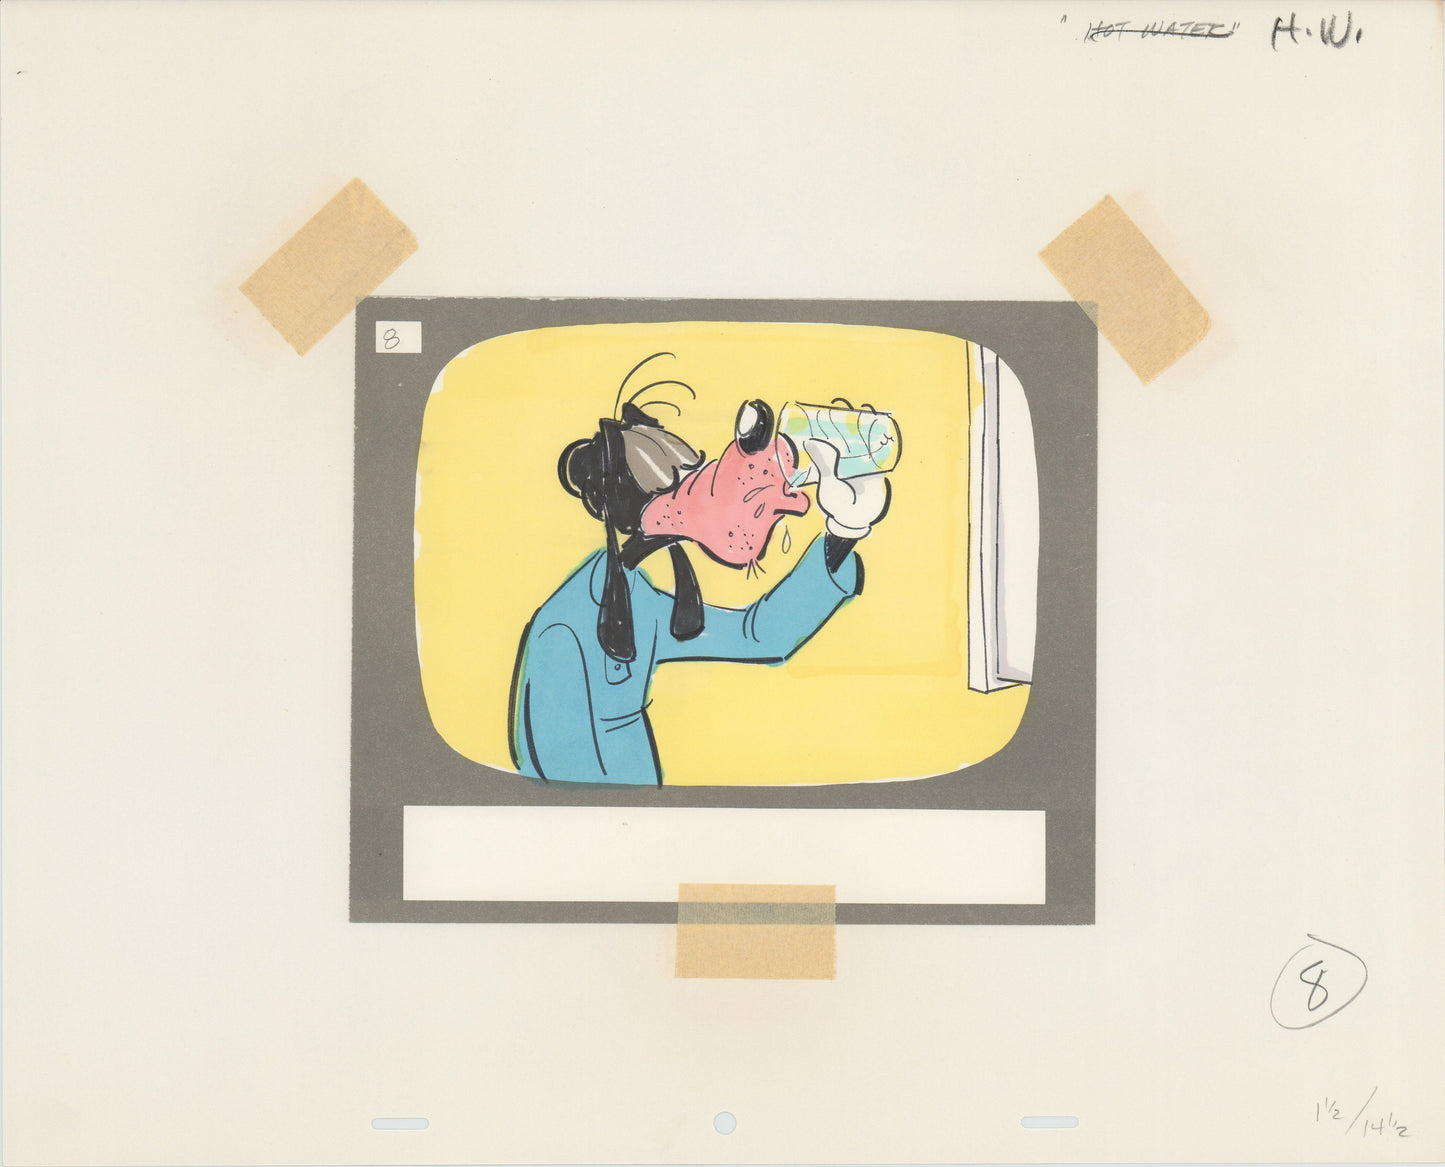 Goofy Willie Ito Hand-drawn Walt Disney Production Animation Storyboard 1970's or 1980's 197 from "Hot Water" Filmstrip